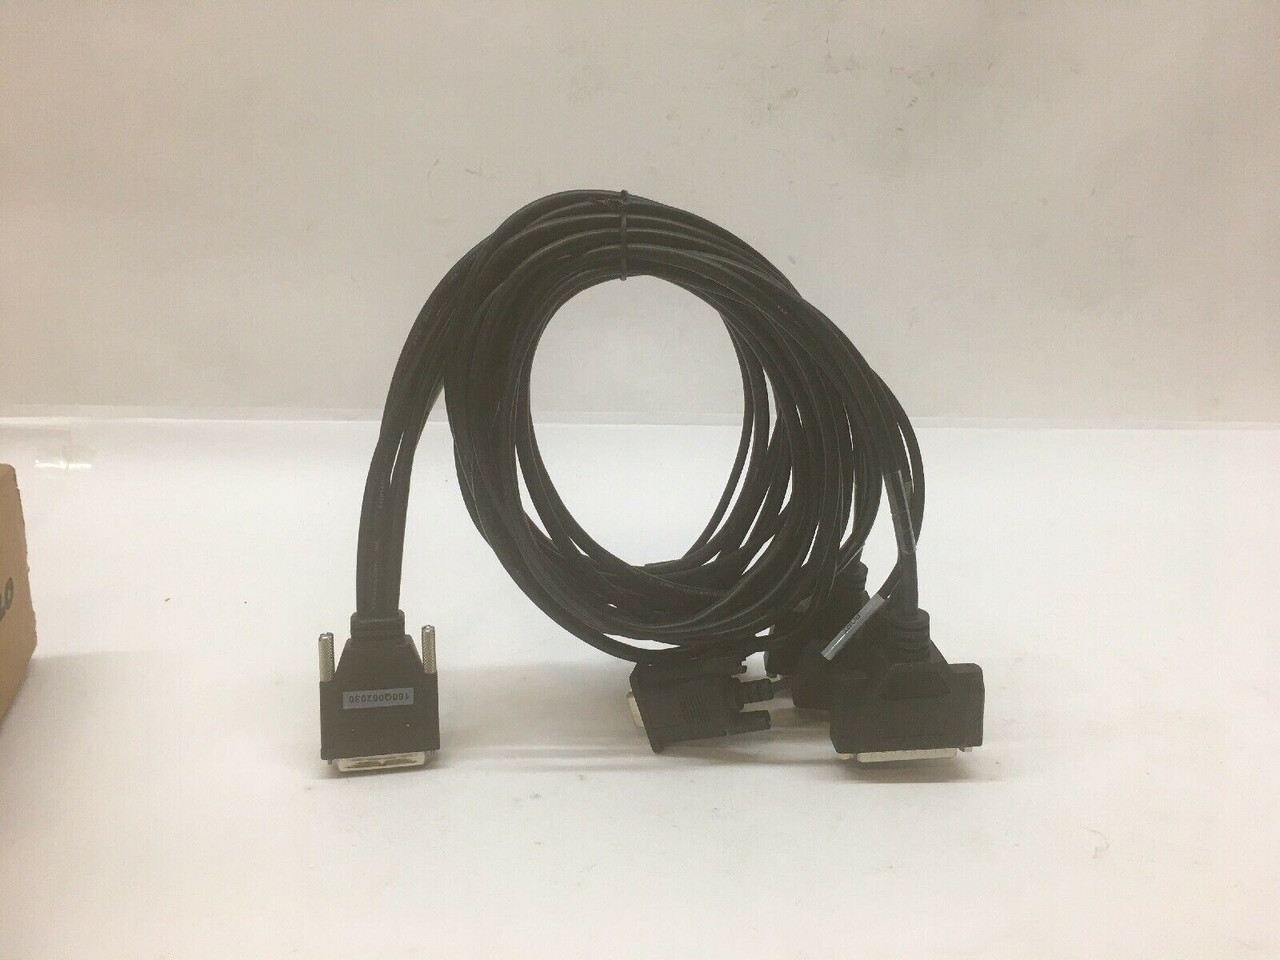 4x RS232 Hydra Cable 160Q0620 SunHillo DTE With Console